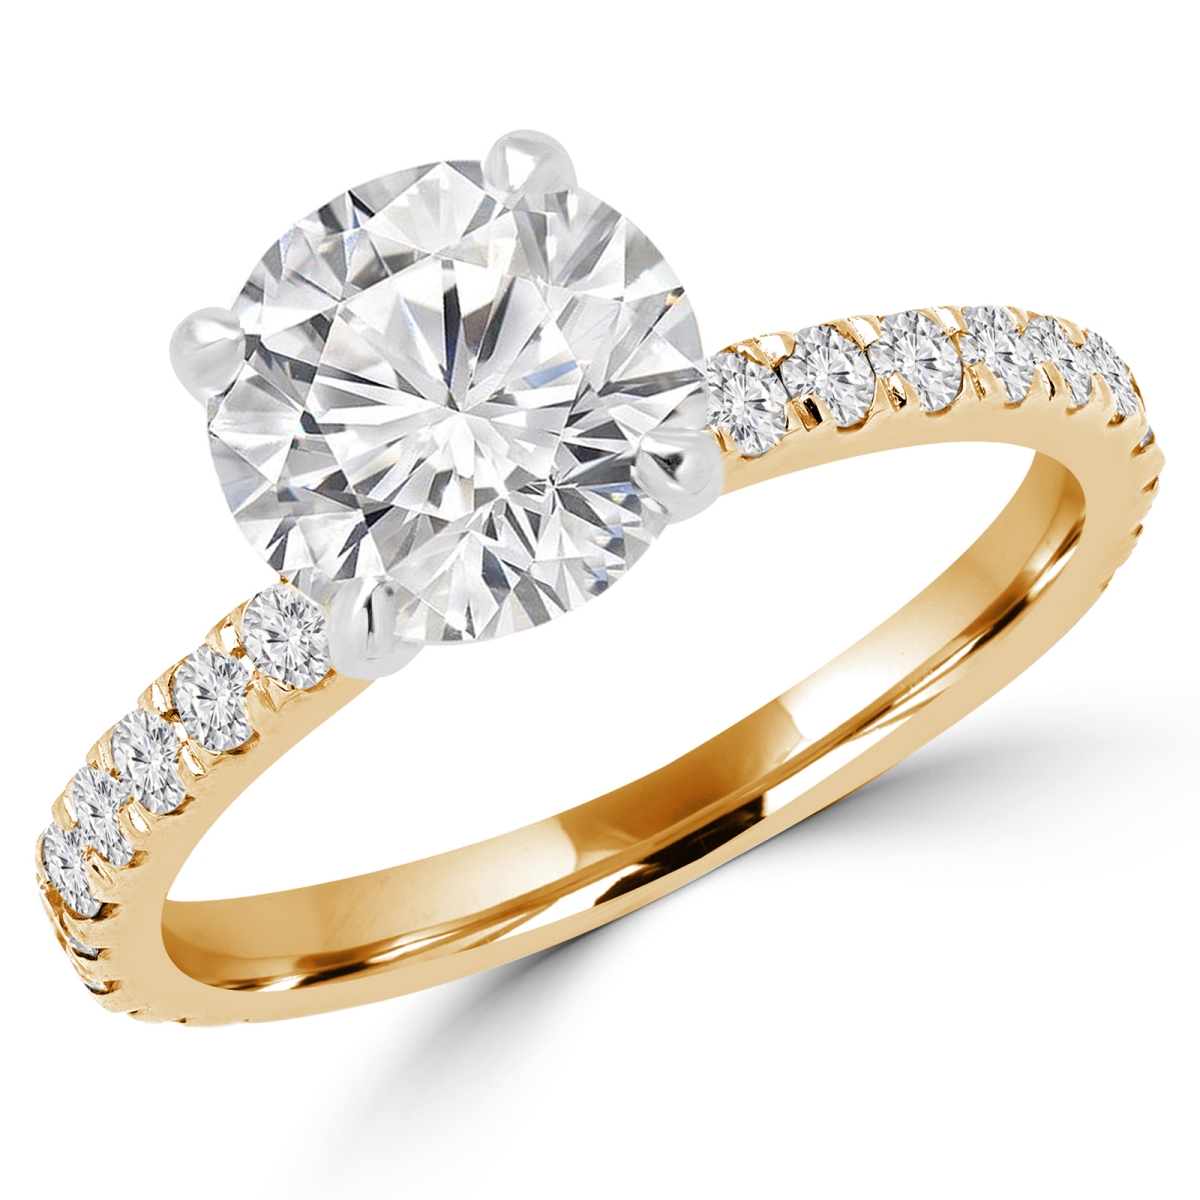 Picture of Majesty Diamonds MD160340-4.5 1 CTW Round Cut Diamond Multi Stone Engagement Ring in 14K Yellow Gold - Size 4.5